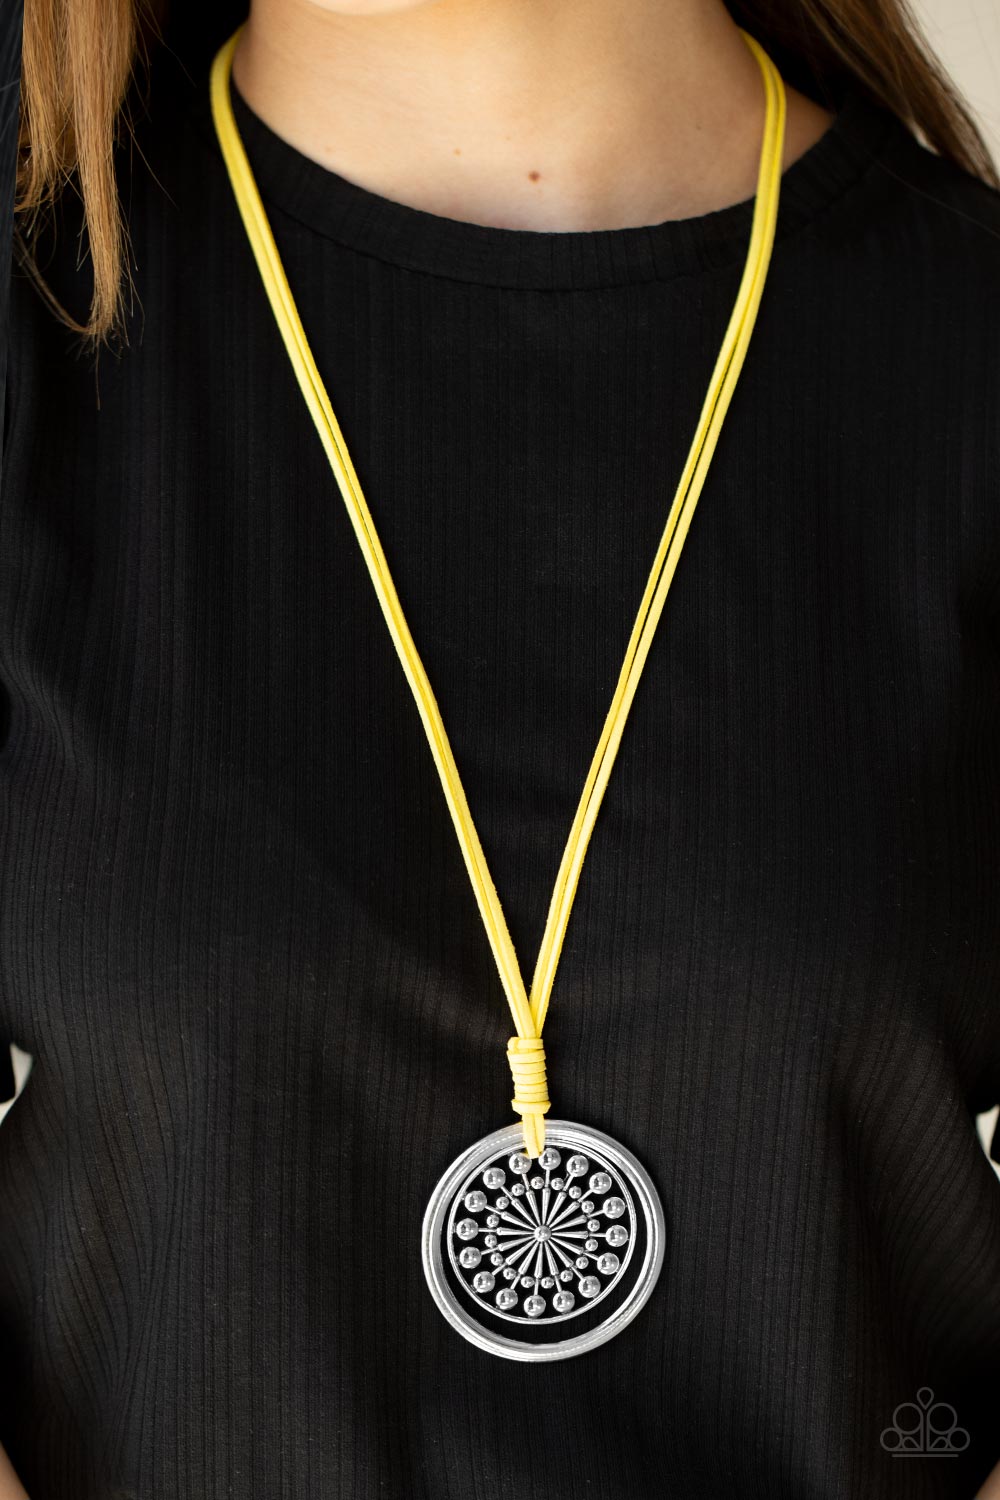 PRE-ORDER - Paparazzi One MANDALA Show - Yellow - Necklace & Earrings - $5 Jewelry with Ashley Swint